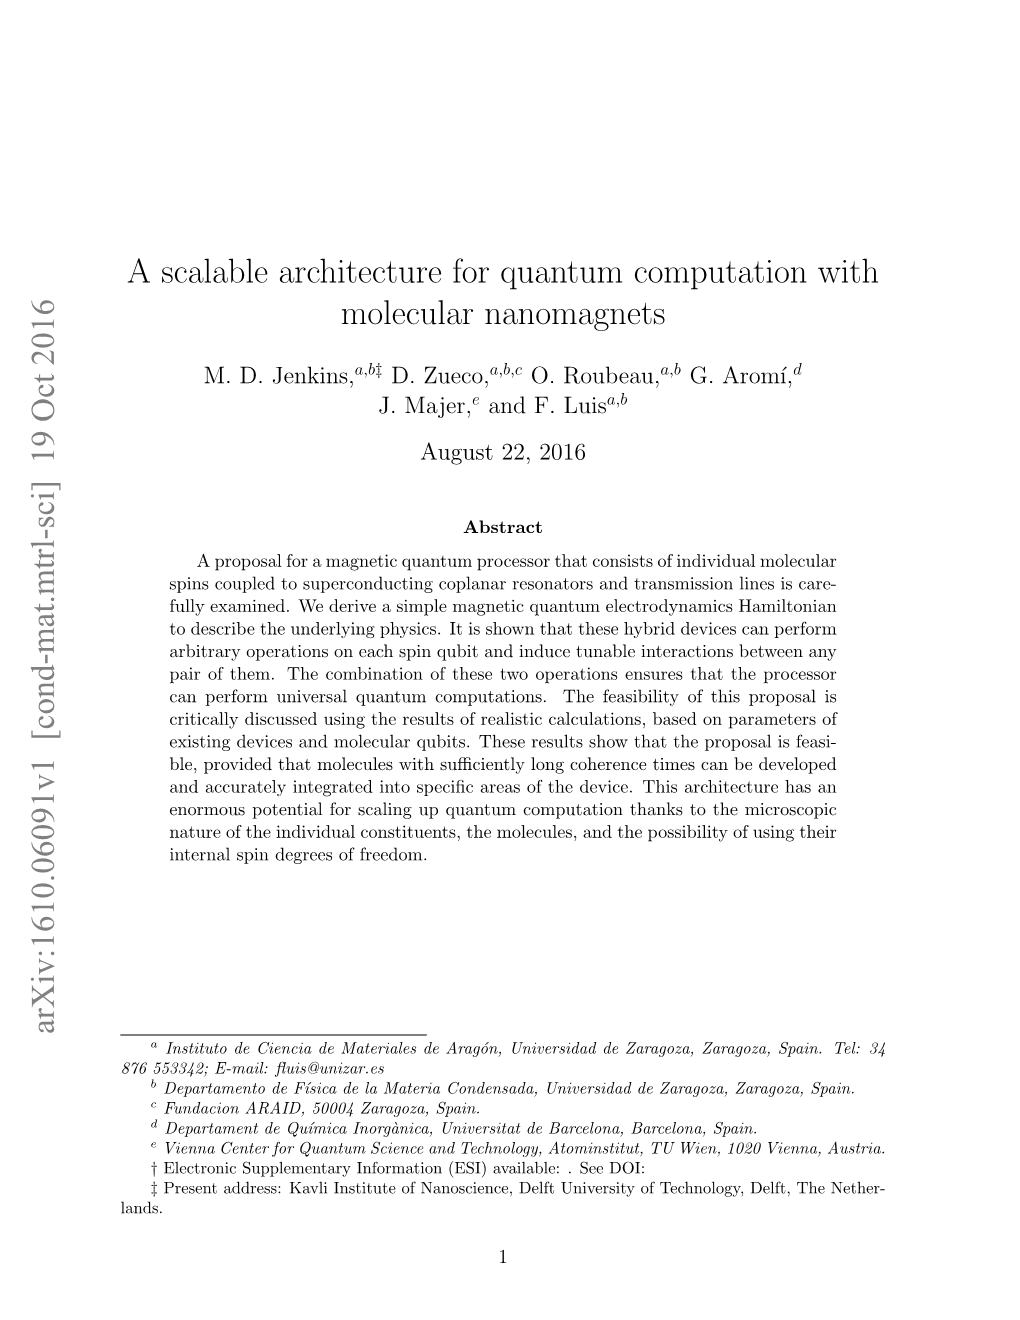 A Scalable Architecture for Quantum Computation with Molecular Nanomagnets